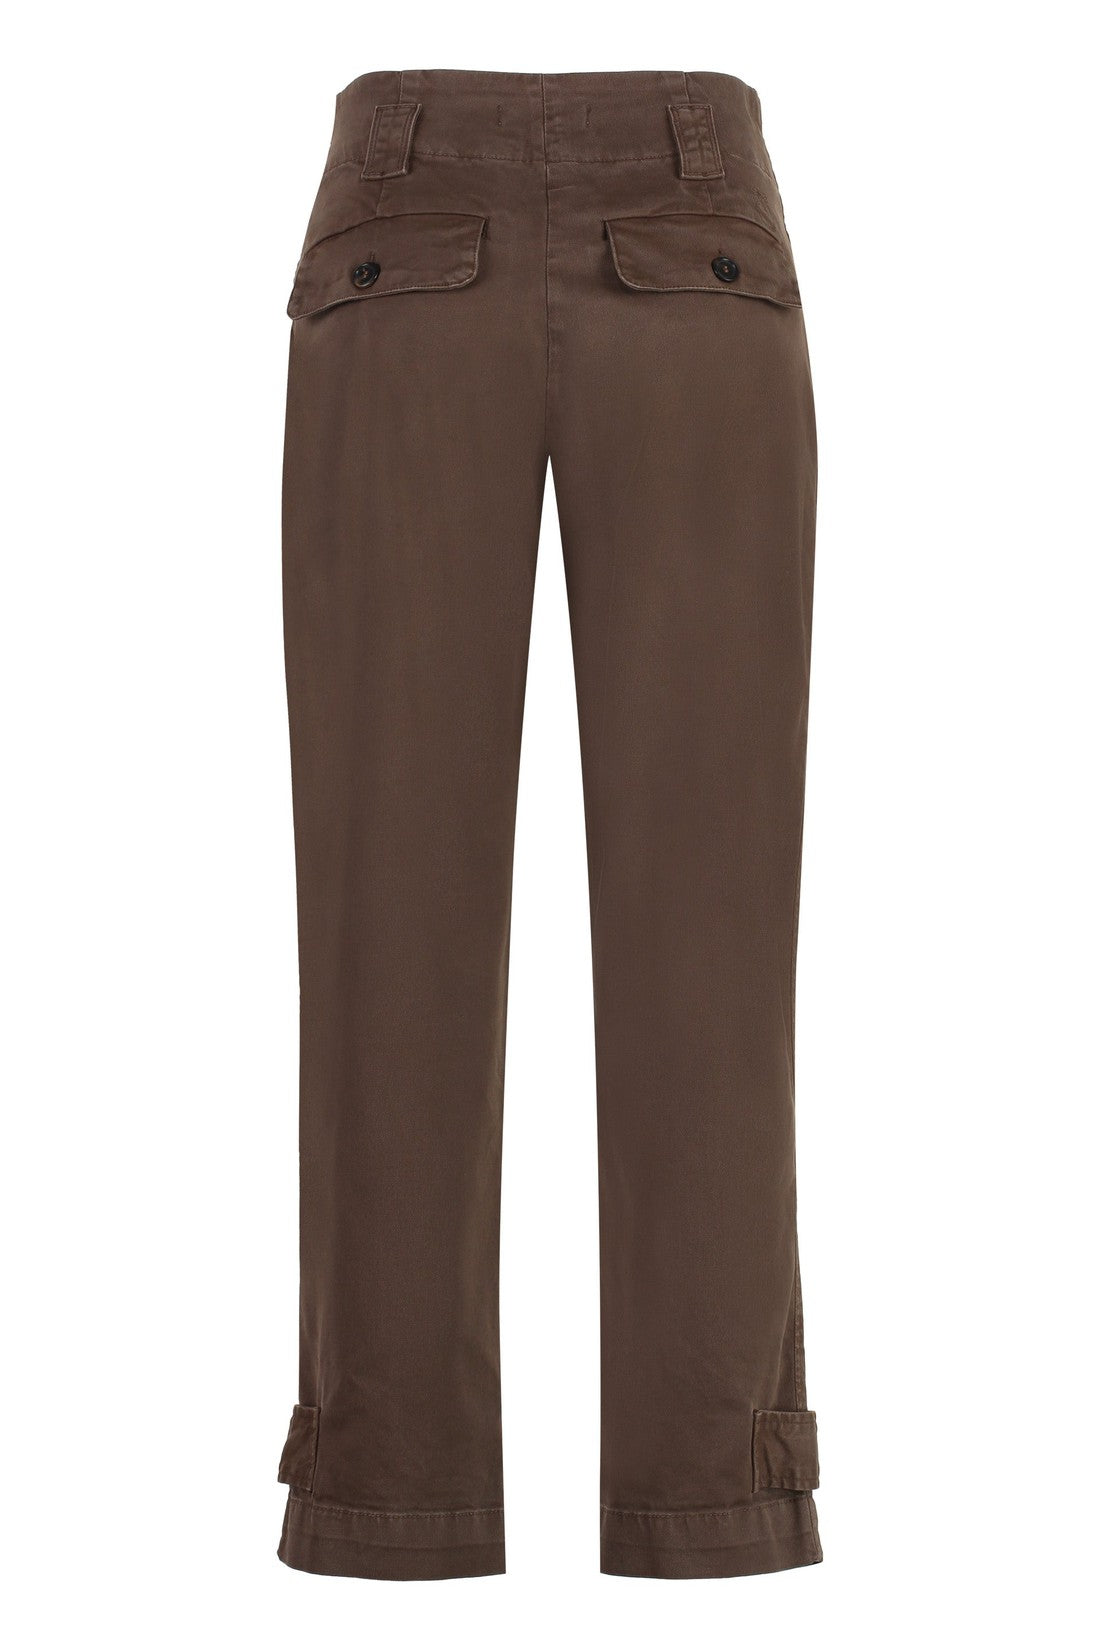 Pinko-OUTLET-SALE-Globo stretch cotton cargo trousers-ARCHIVIST